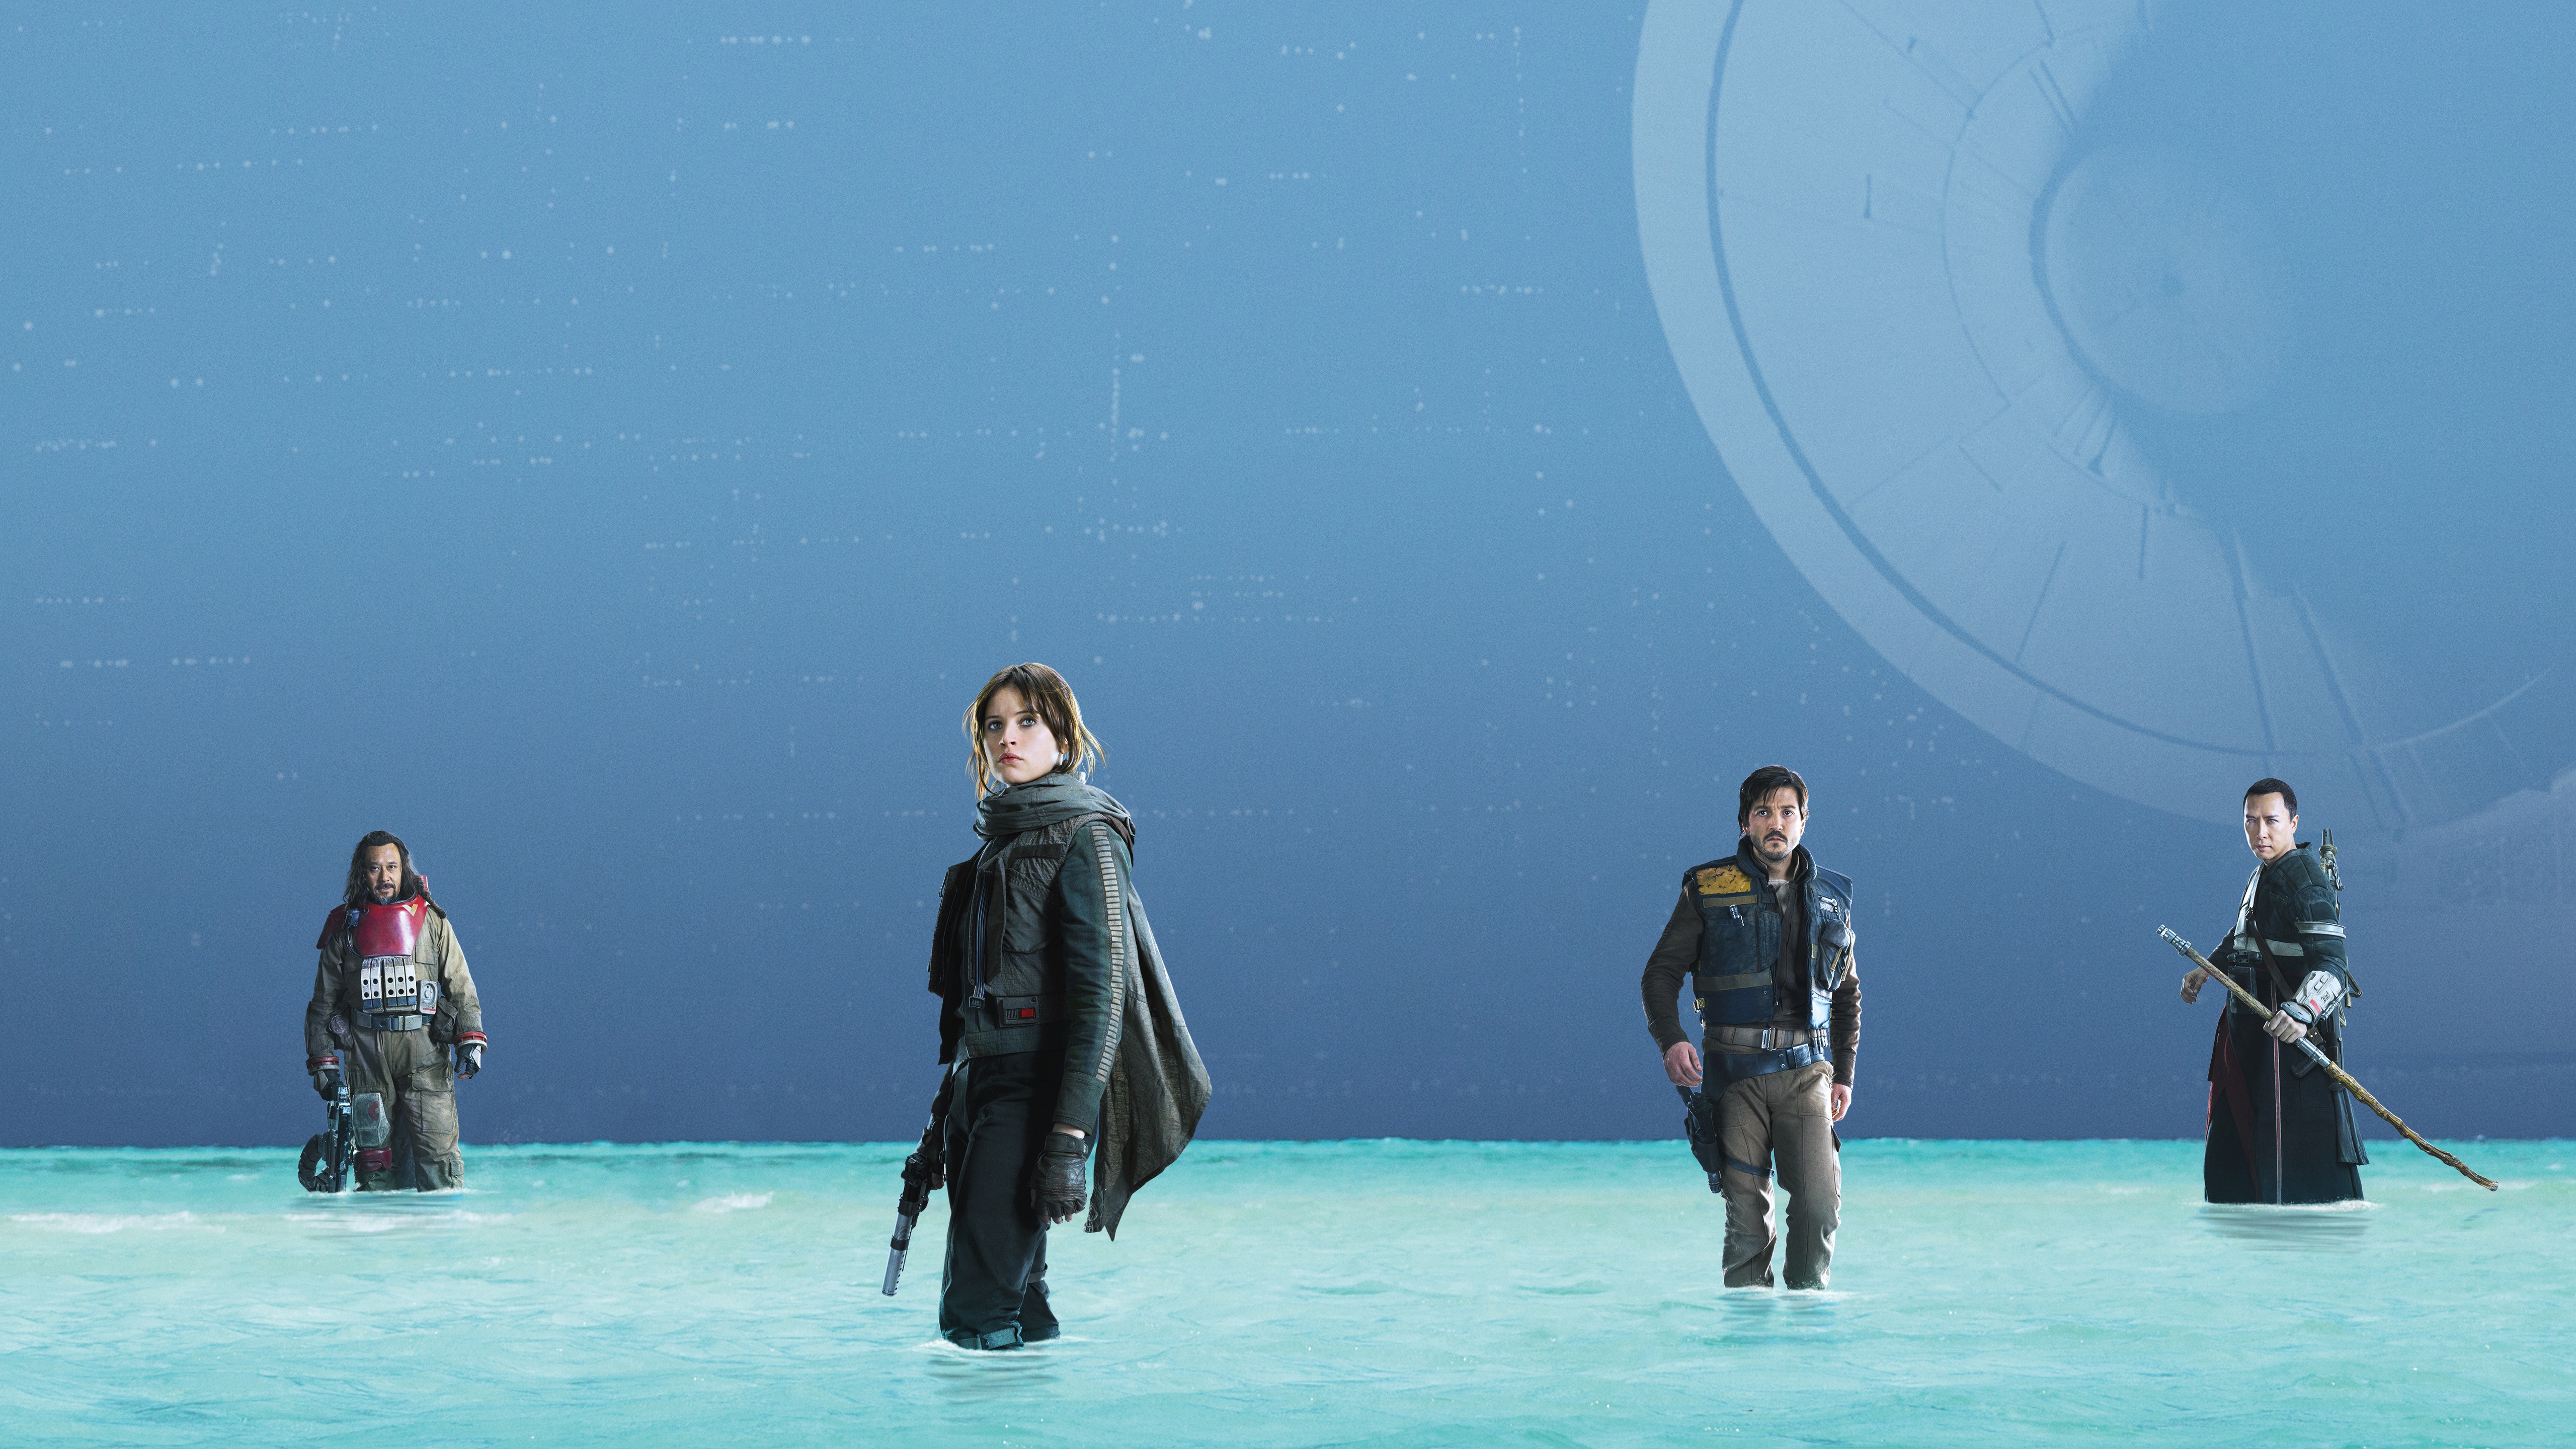 Movie Rogue One: A Star Wars Story HD Wallpaper | Background Image